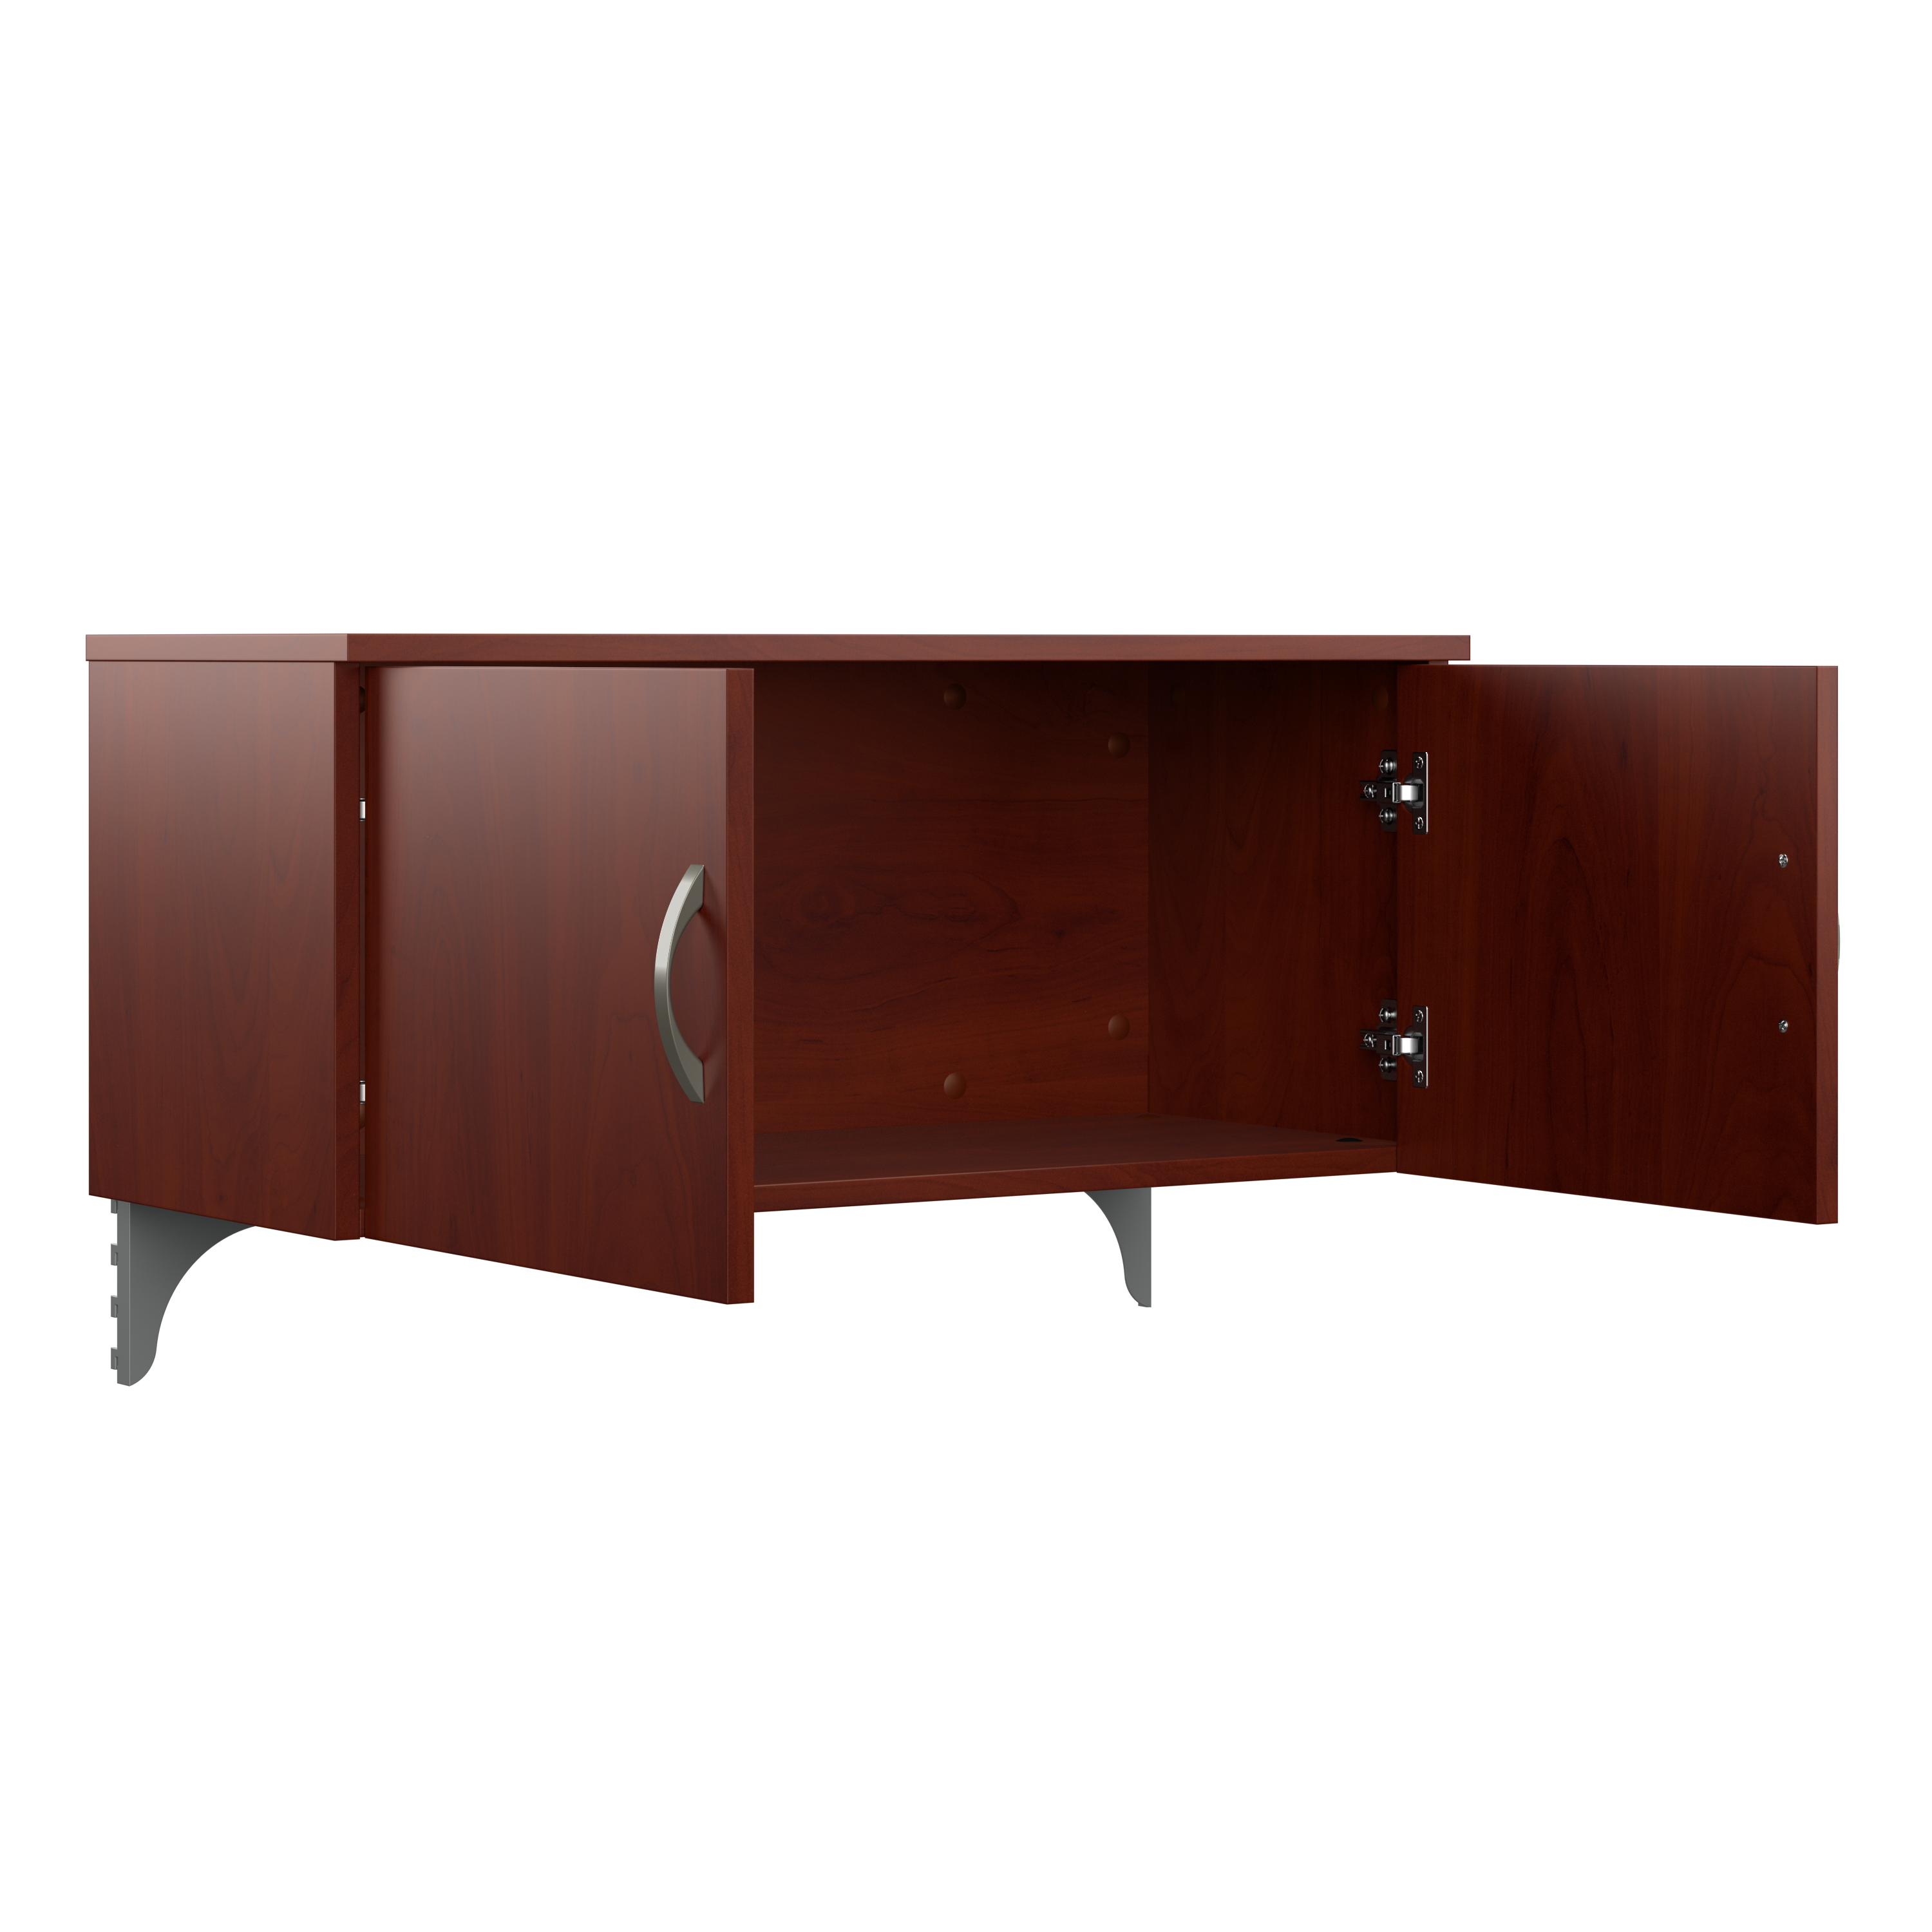 Shop Bush Business Furniture Office in an Hour Cubicle Storage with Cabinet, Drawers, Paper Tray, and Pencil Holder 05 WC36490-03K #color_hansen cherry